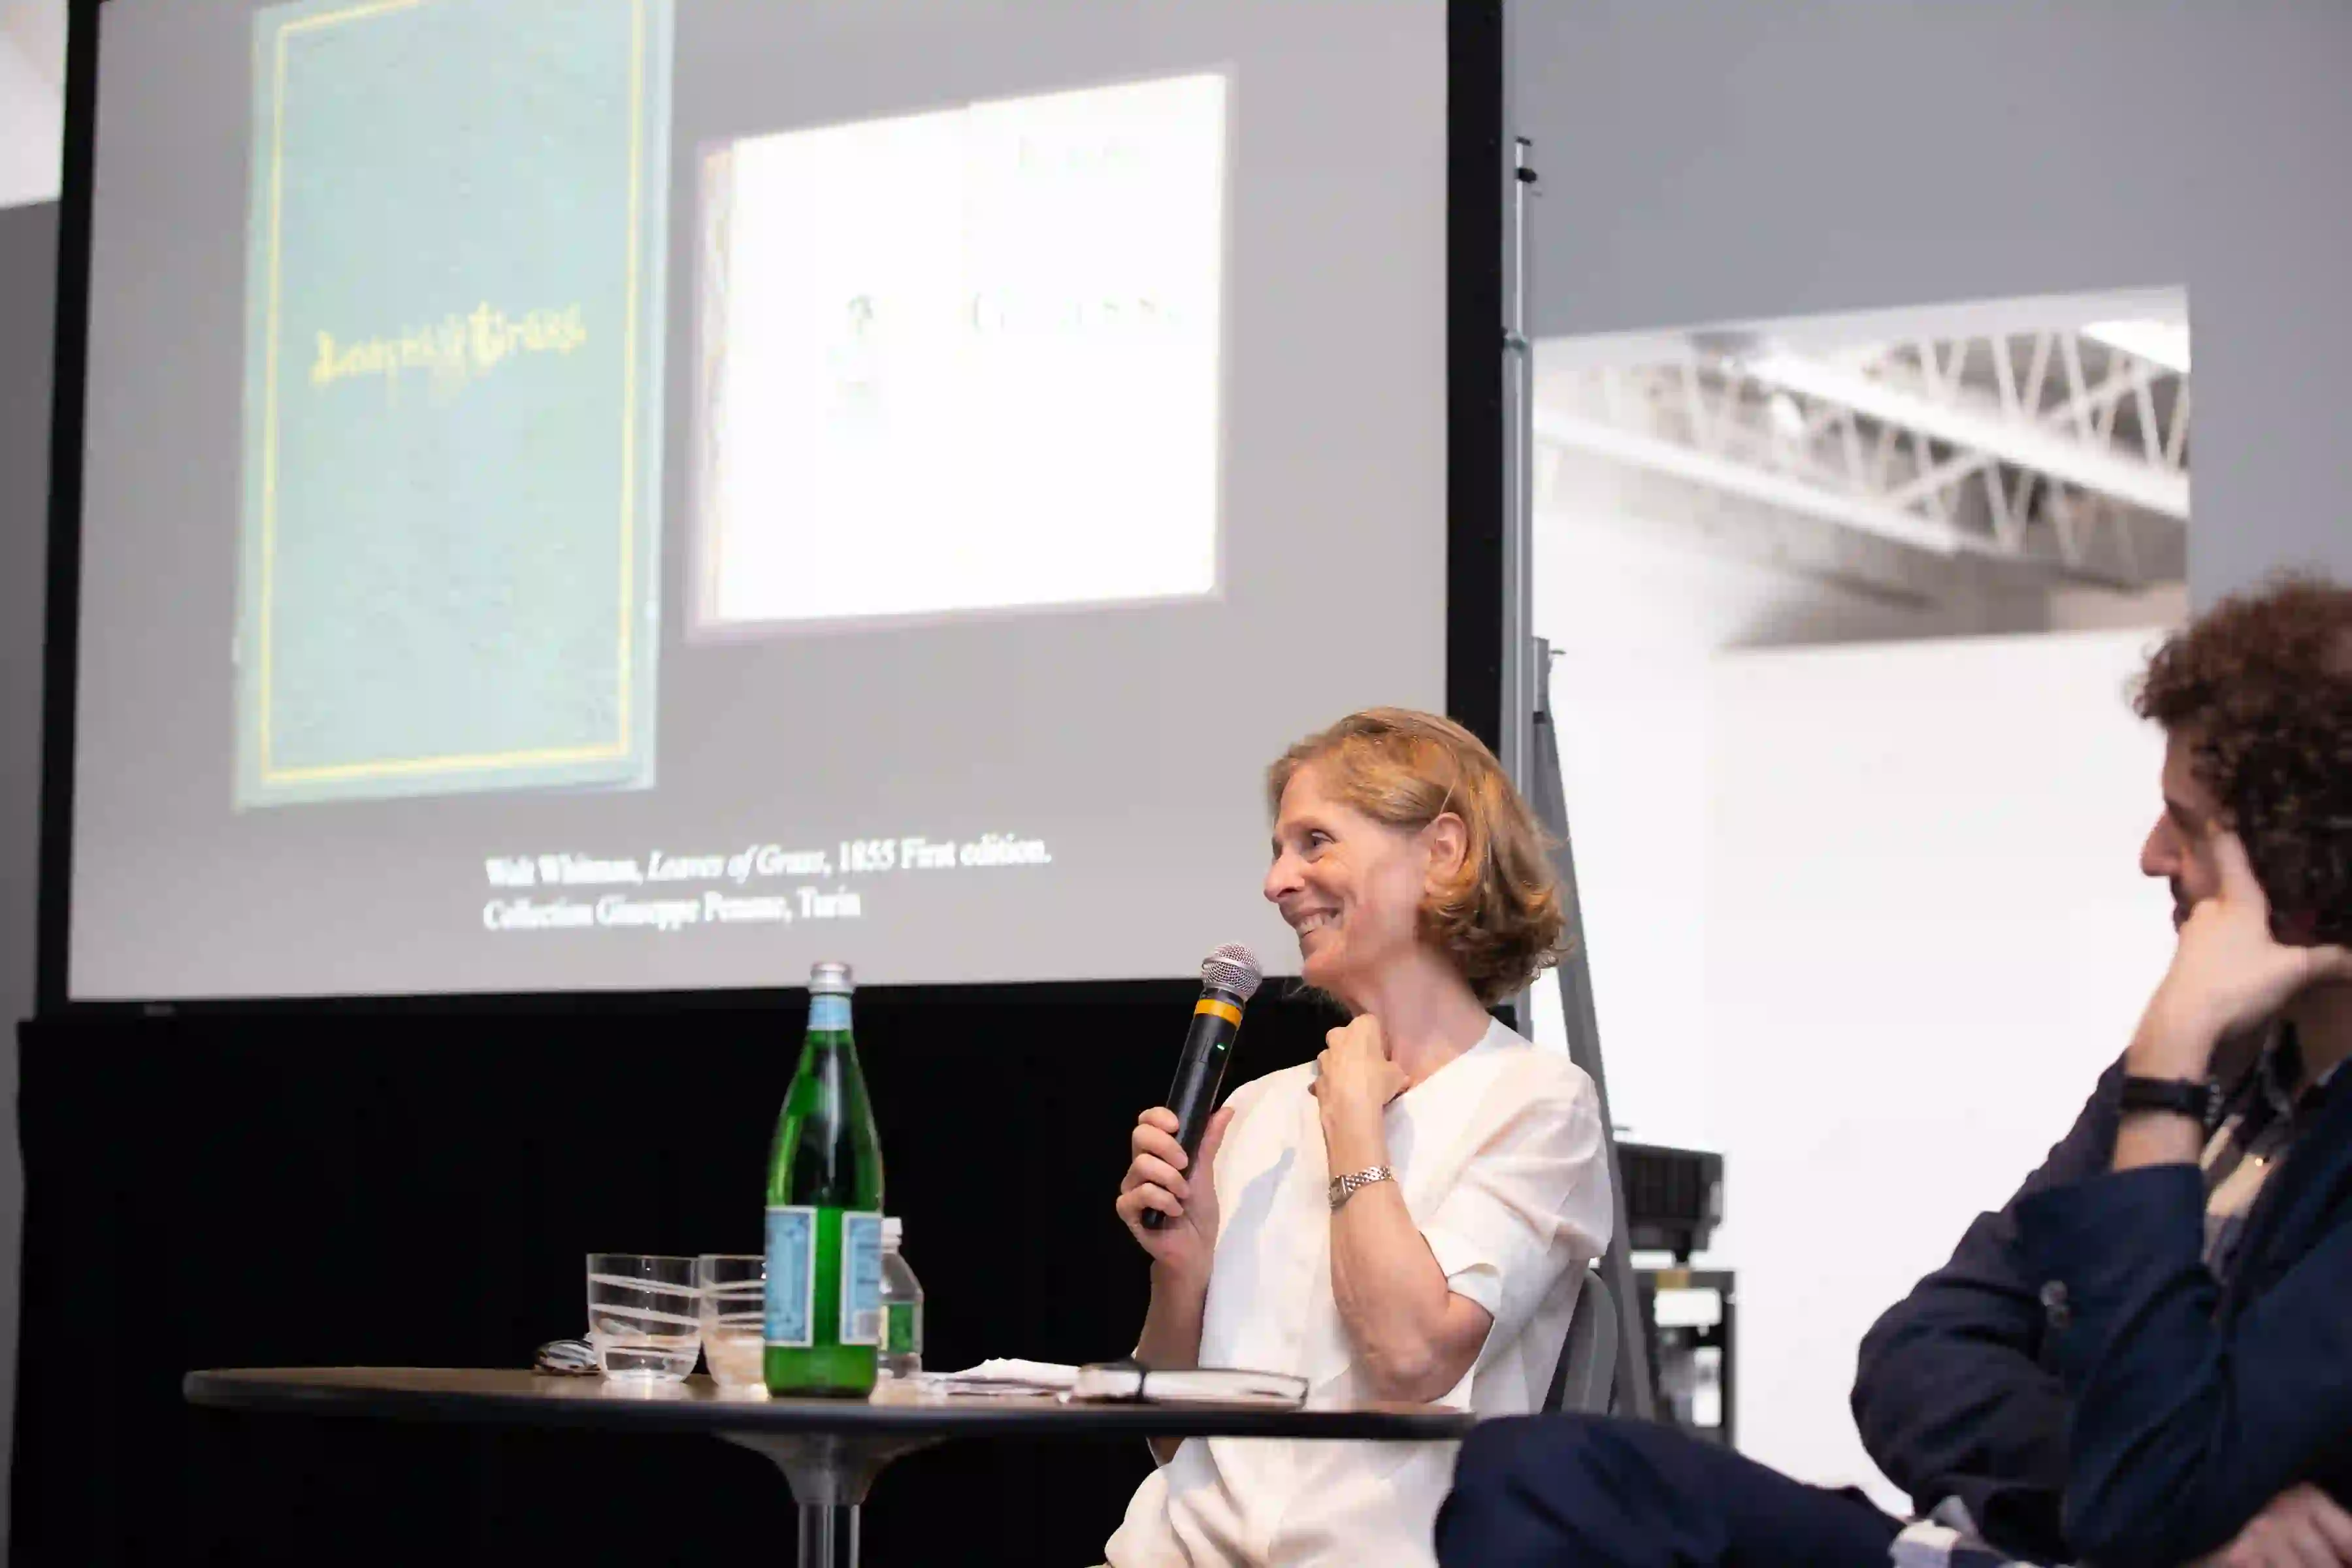 Q+A with Distinguished Professor at Hunter College and the Graduate Center, CUNY, Emily Braun during her lecture, "Leaves of Grass, Clay, and Bronze: Giuseppe Penone and Walt Whitman," on June 1, 2019